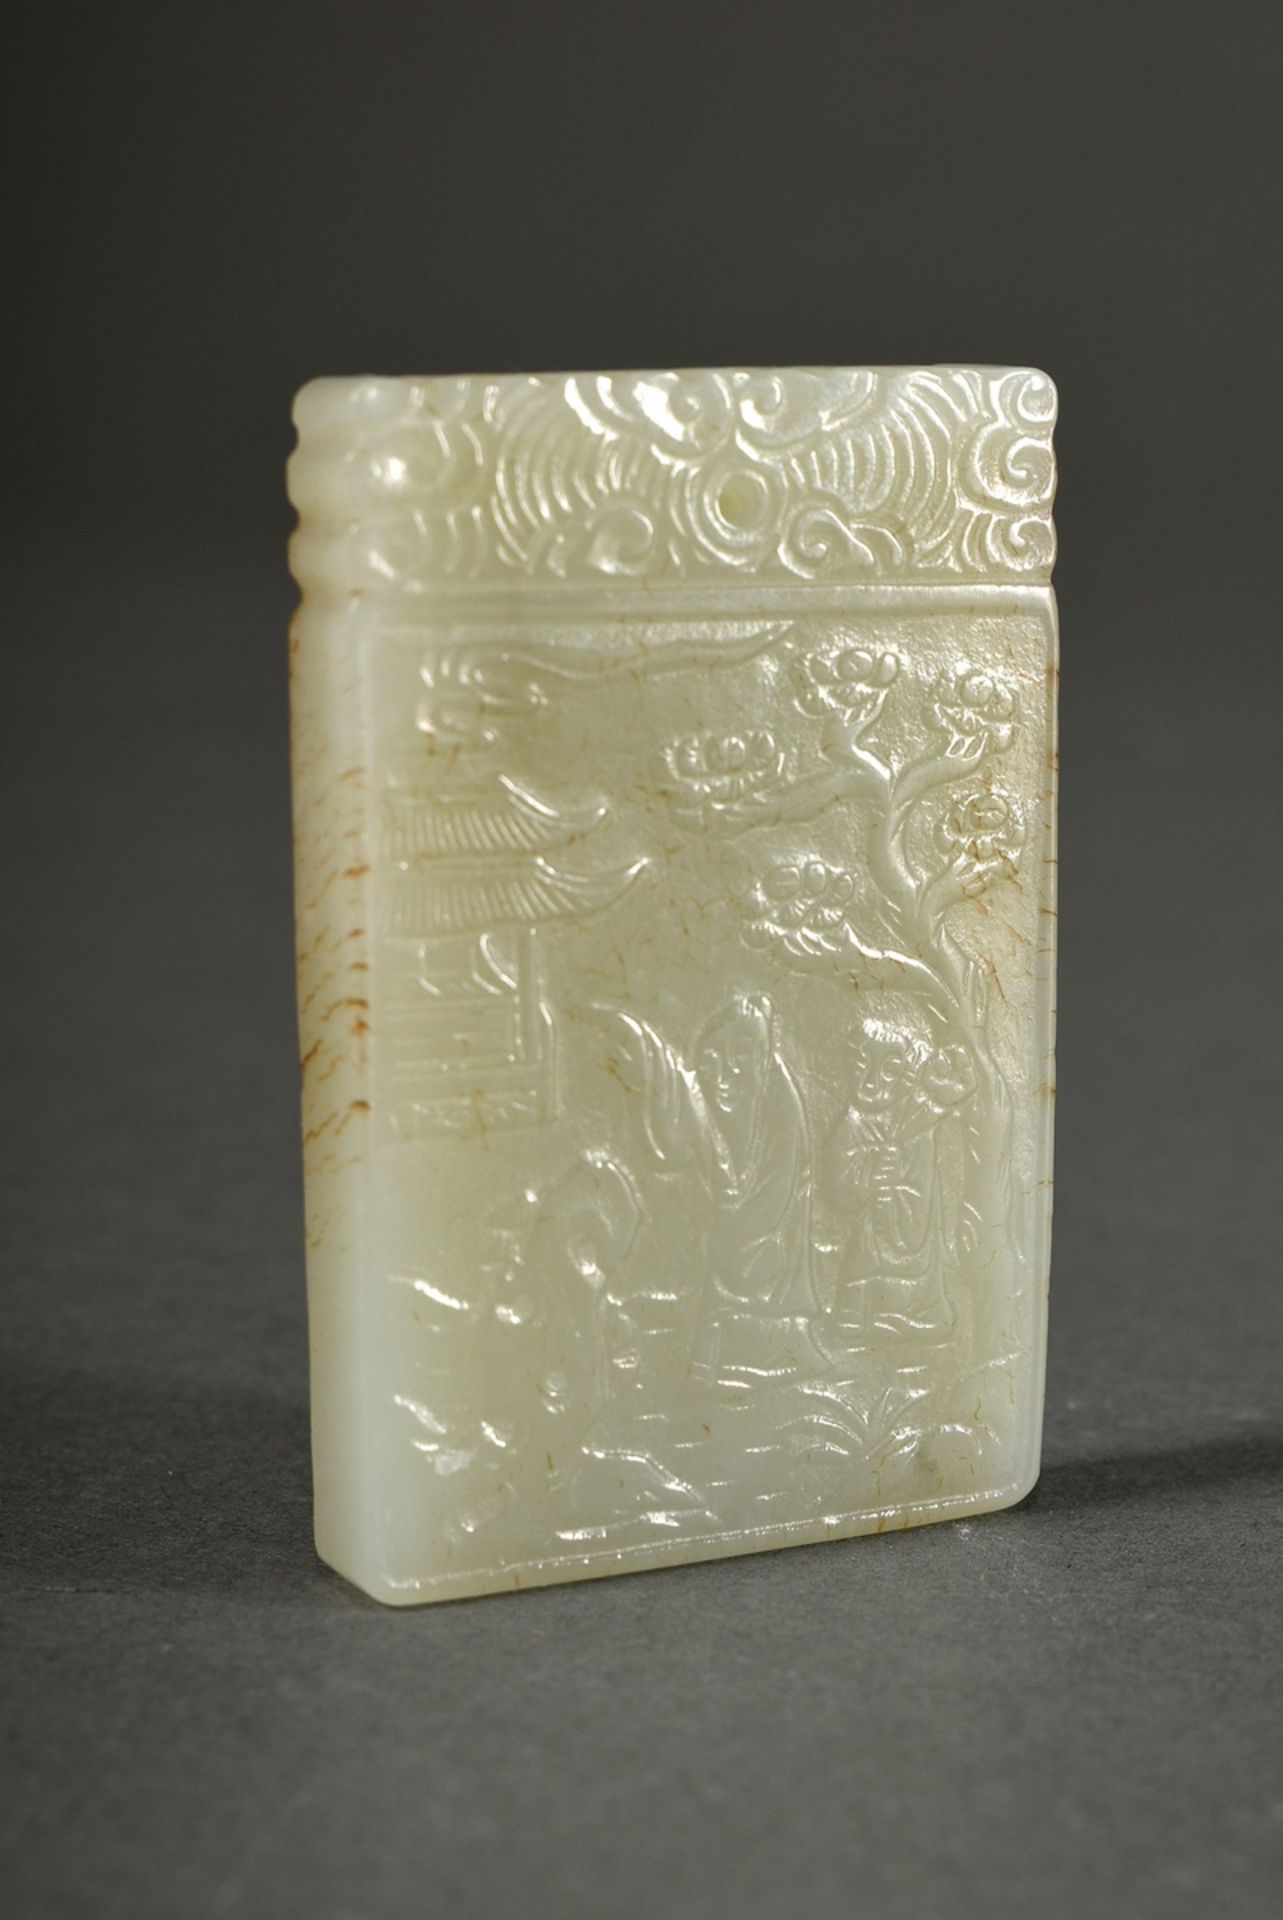 Seladon jade plaque "Two Wise Men in the Garden", characters on verso, depictions in low relief, wo - Image 6 of 6